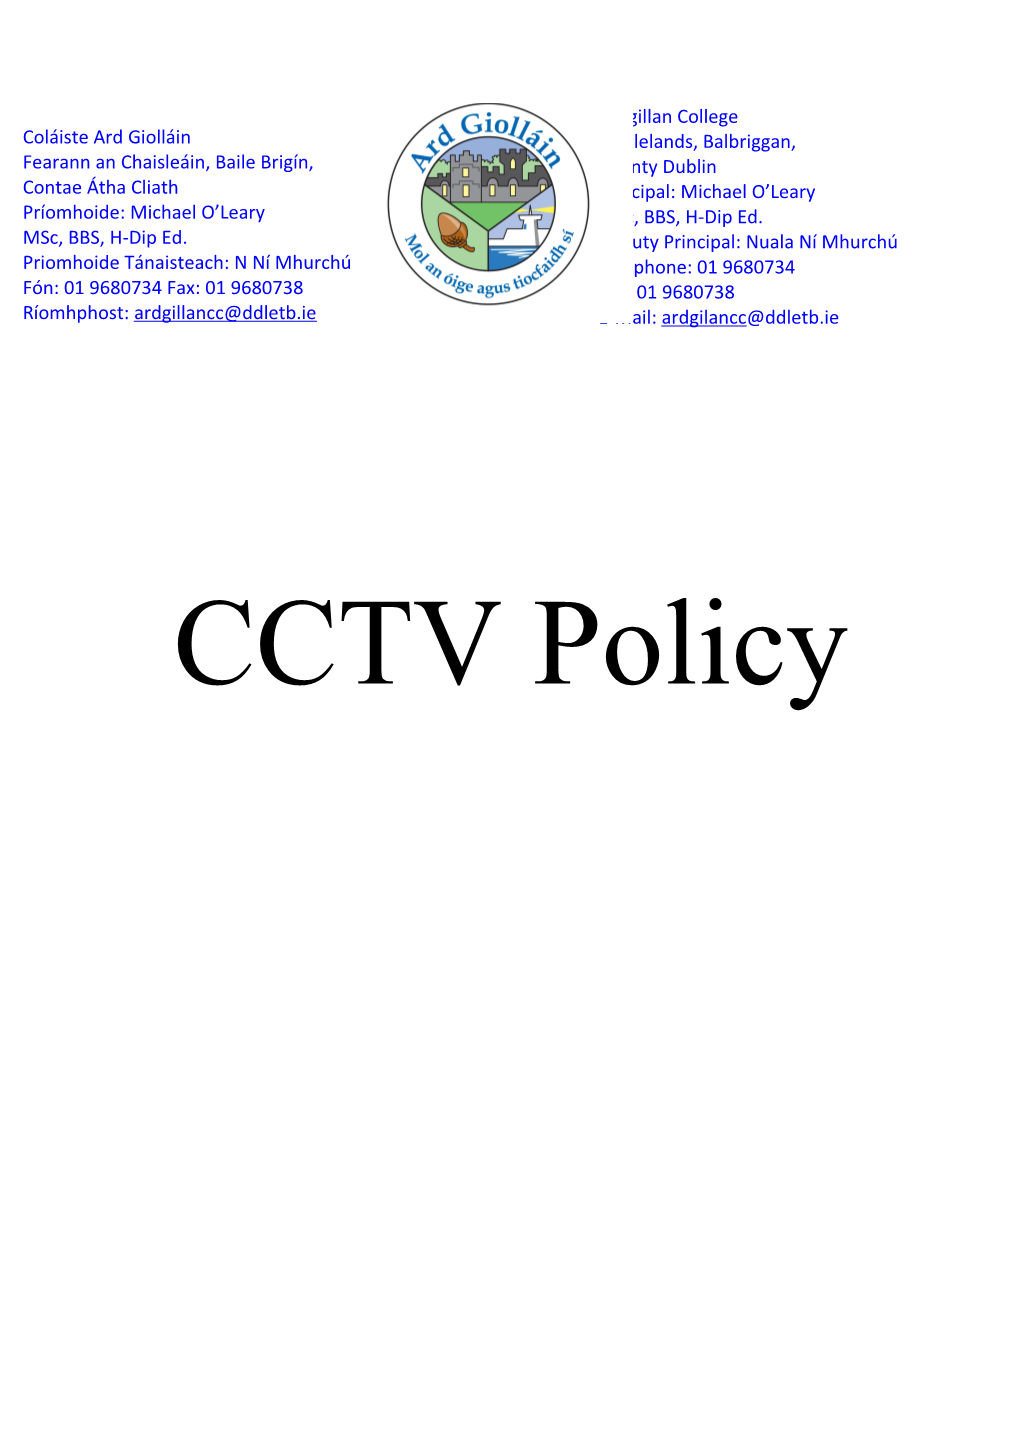 The Purpose of This Policy Is to Regulate the Use of Closed Circuit Television and Its